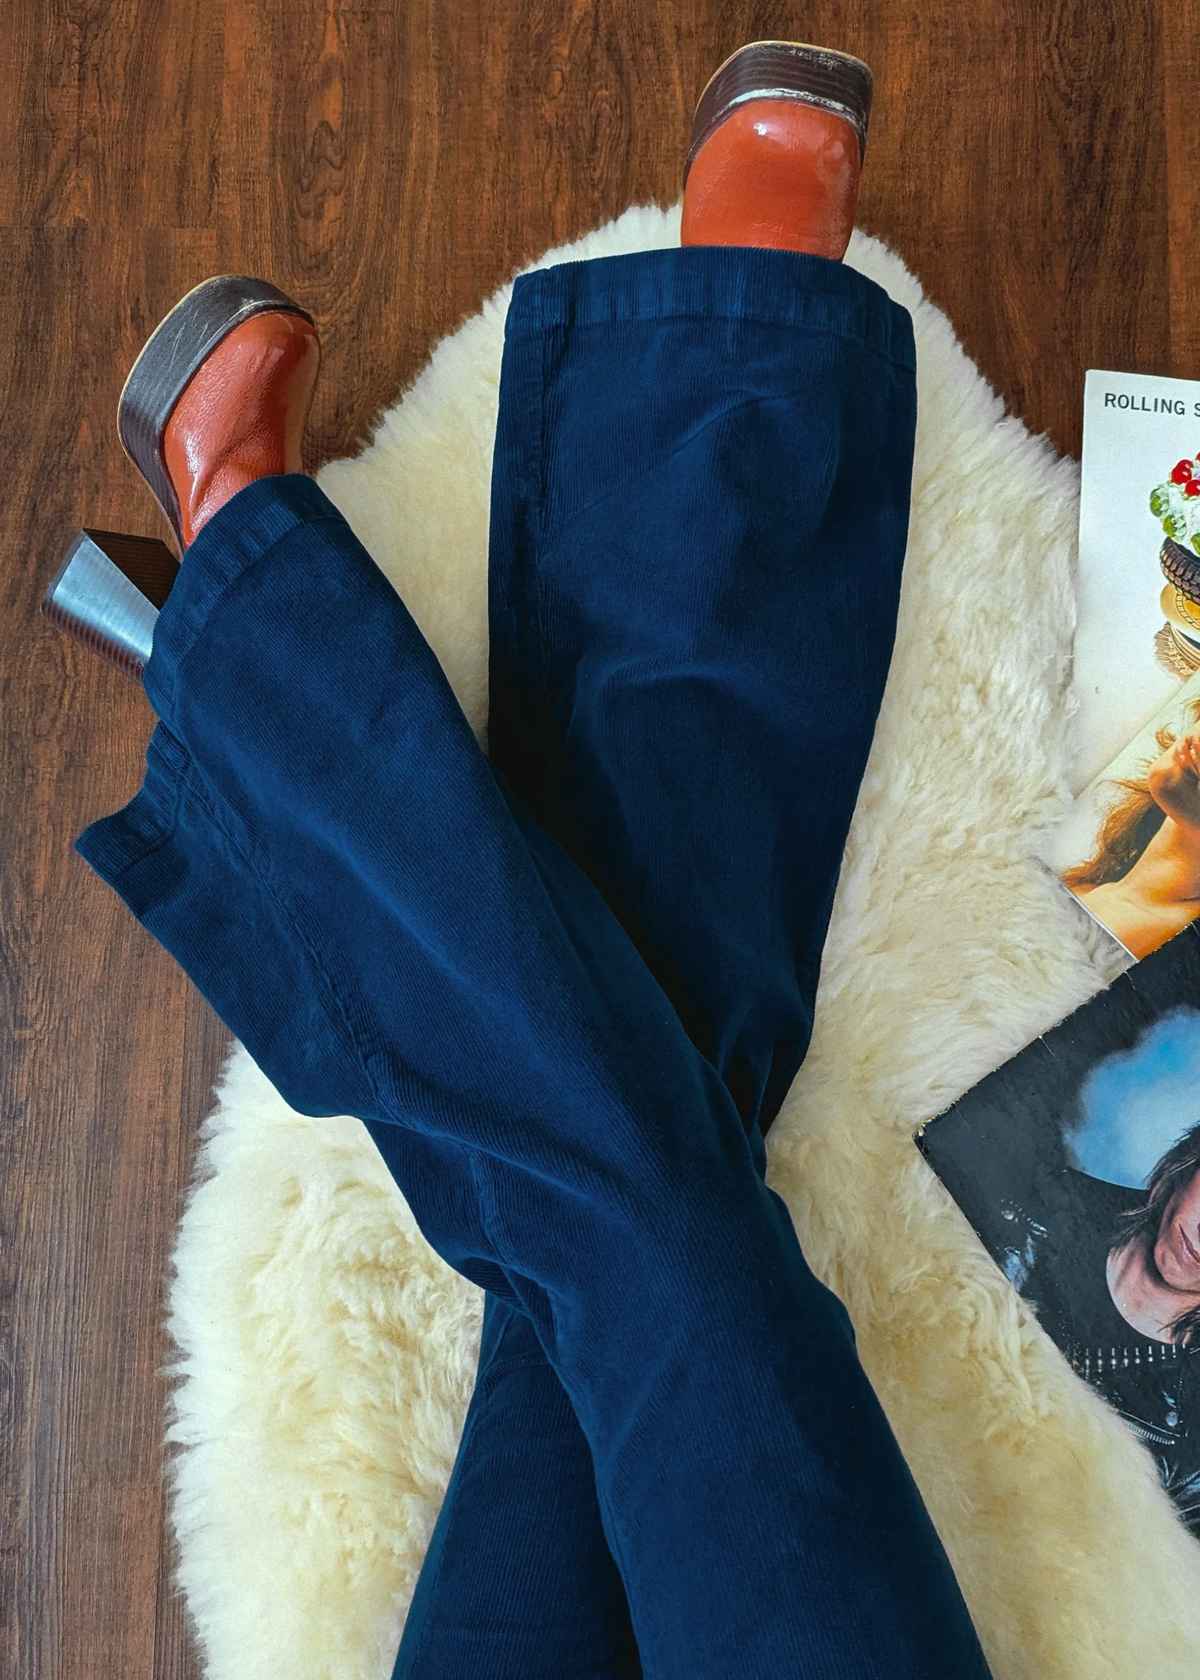 Rolla's Jeans Marine Blue Corduroy Eastcoast Flare: 70s inspired bell bottoms with a high rise waist, velvety soft thin wale corduroy, and a flare leg.